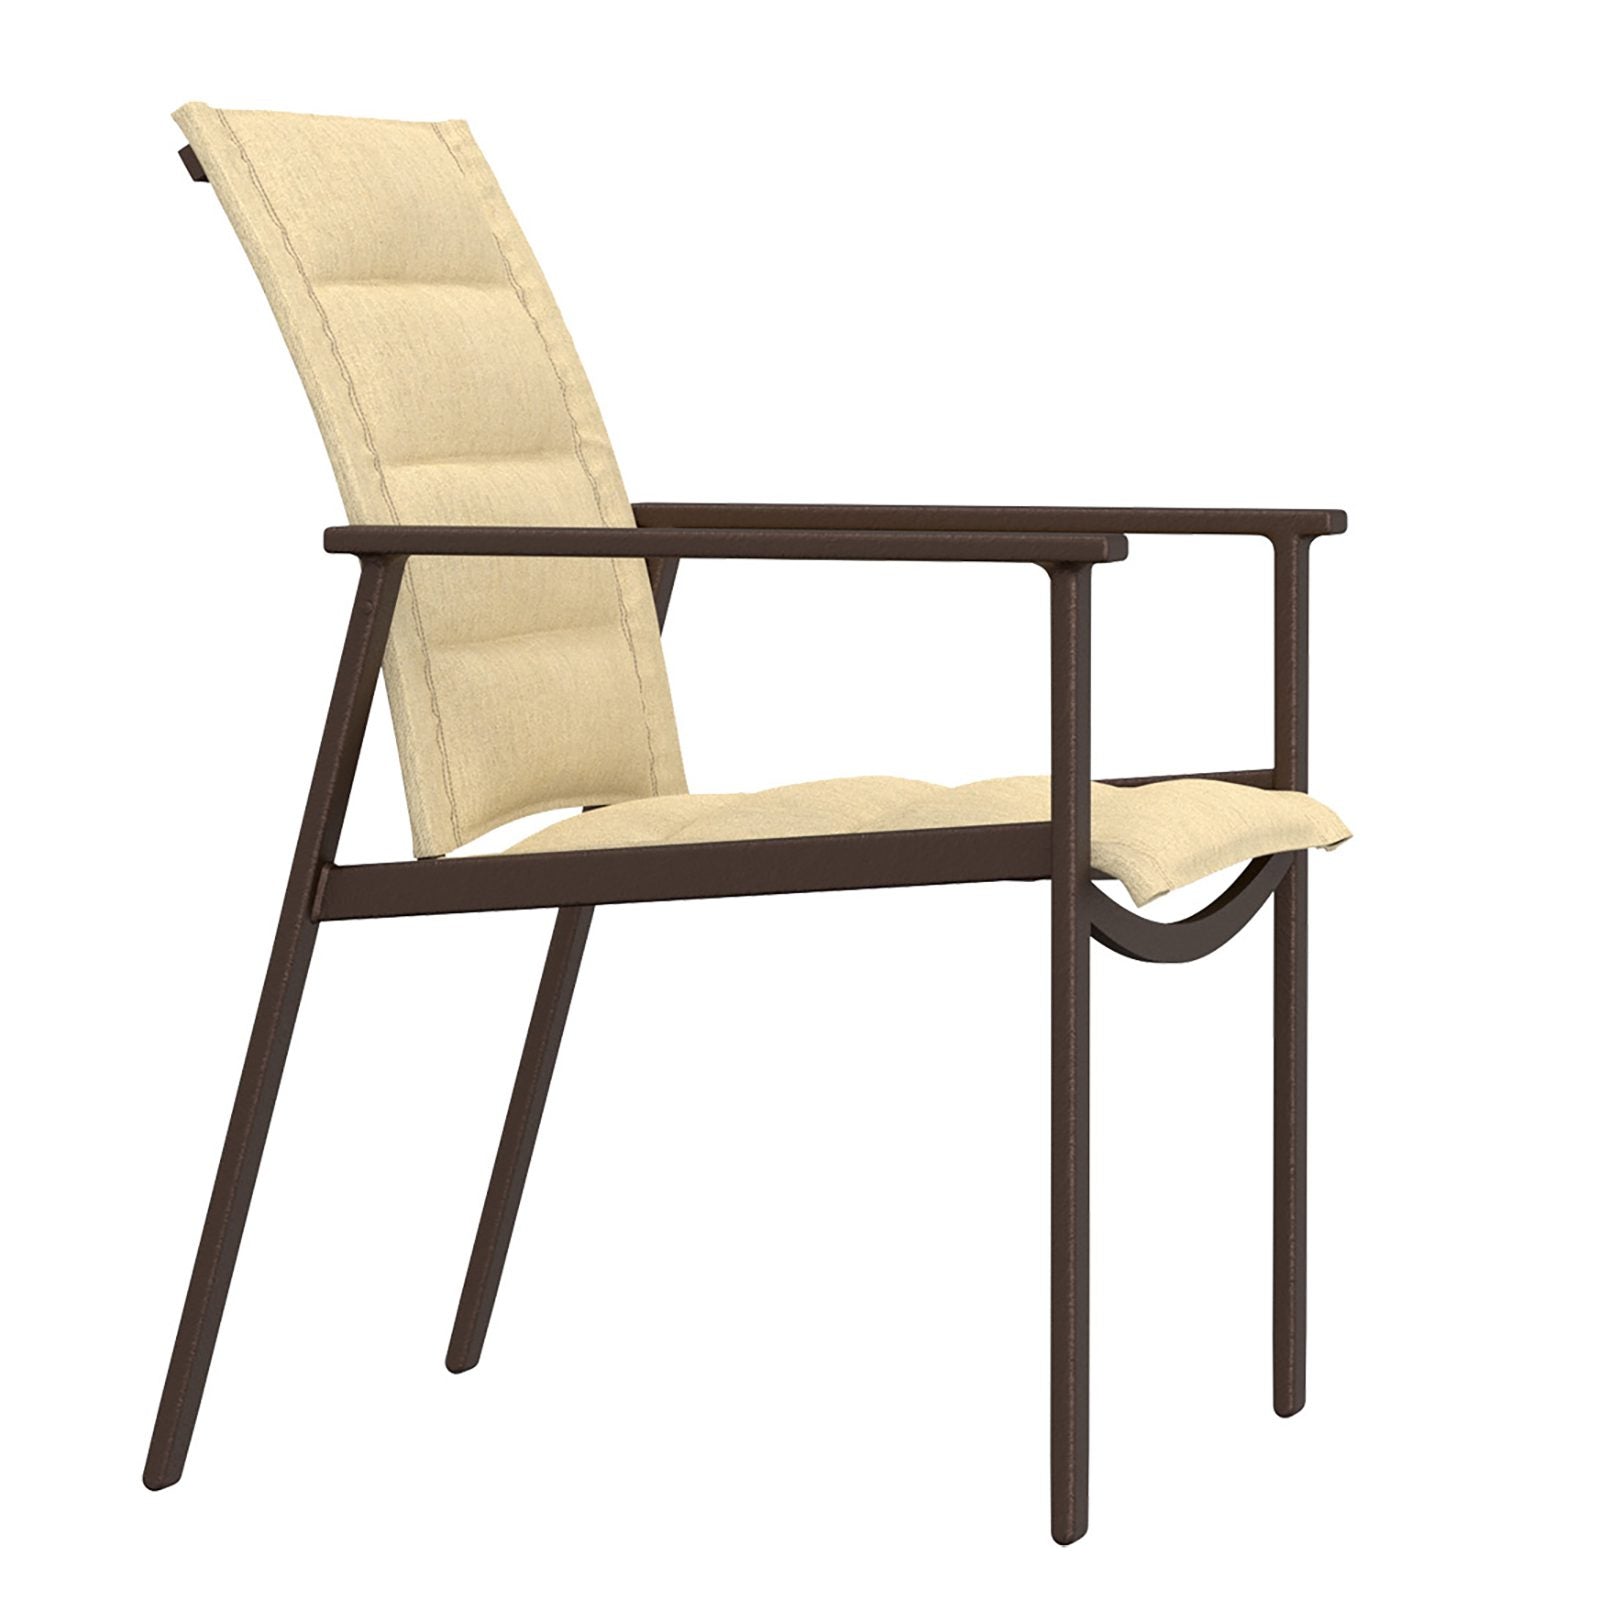 Marin Padded Sling Dining Arm Chair by Ow Lee